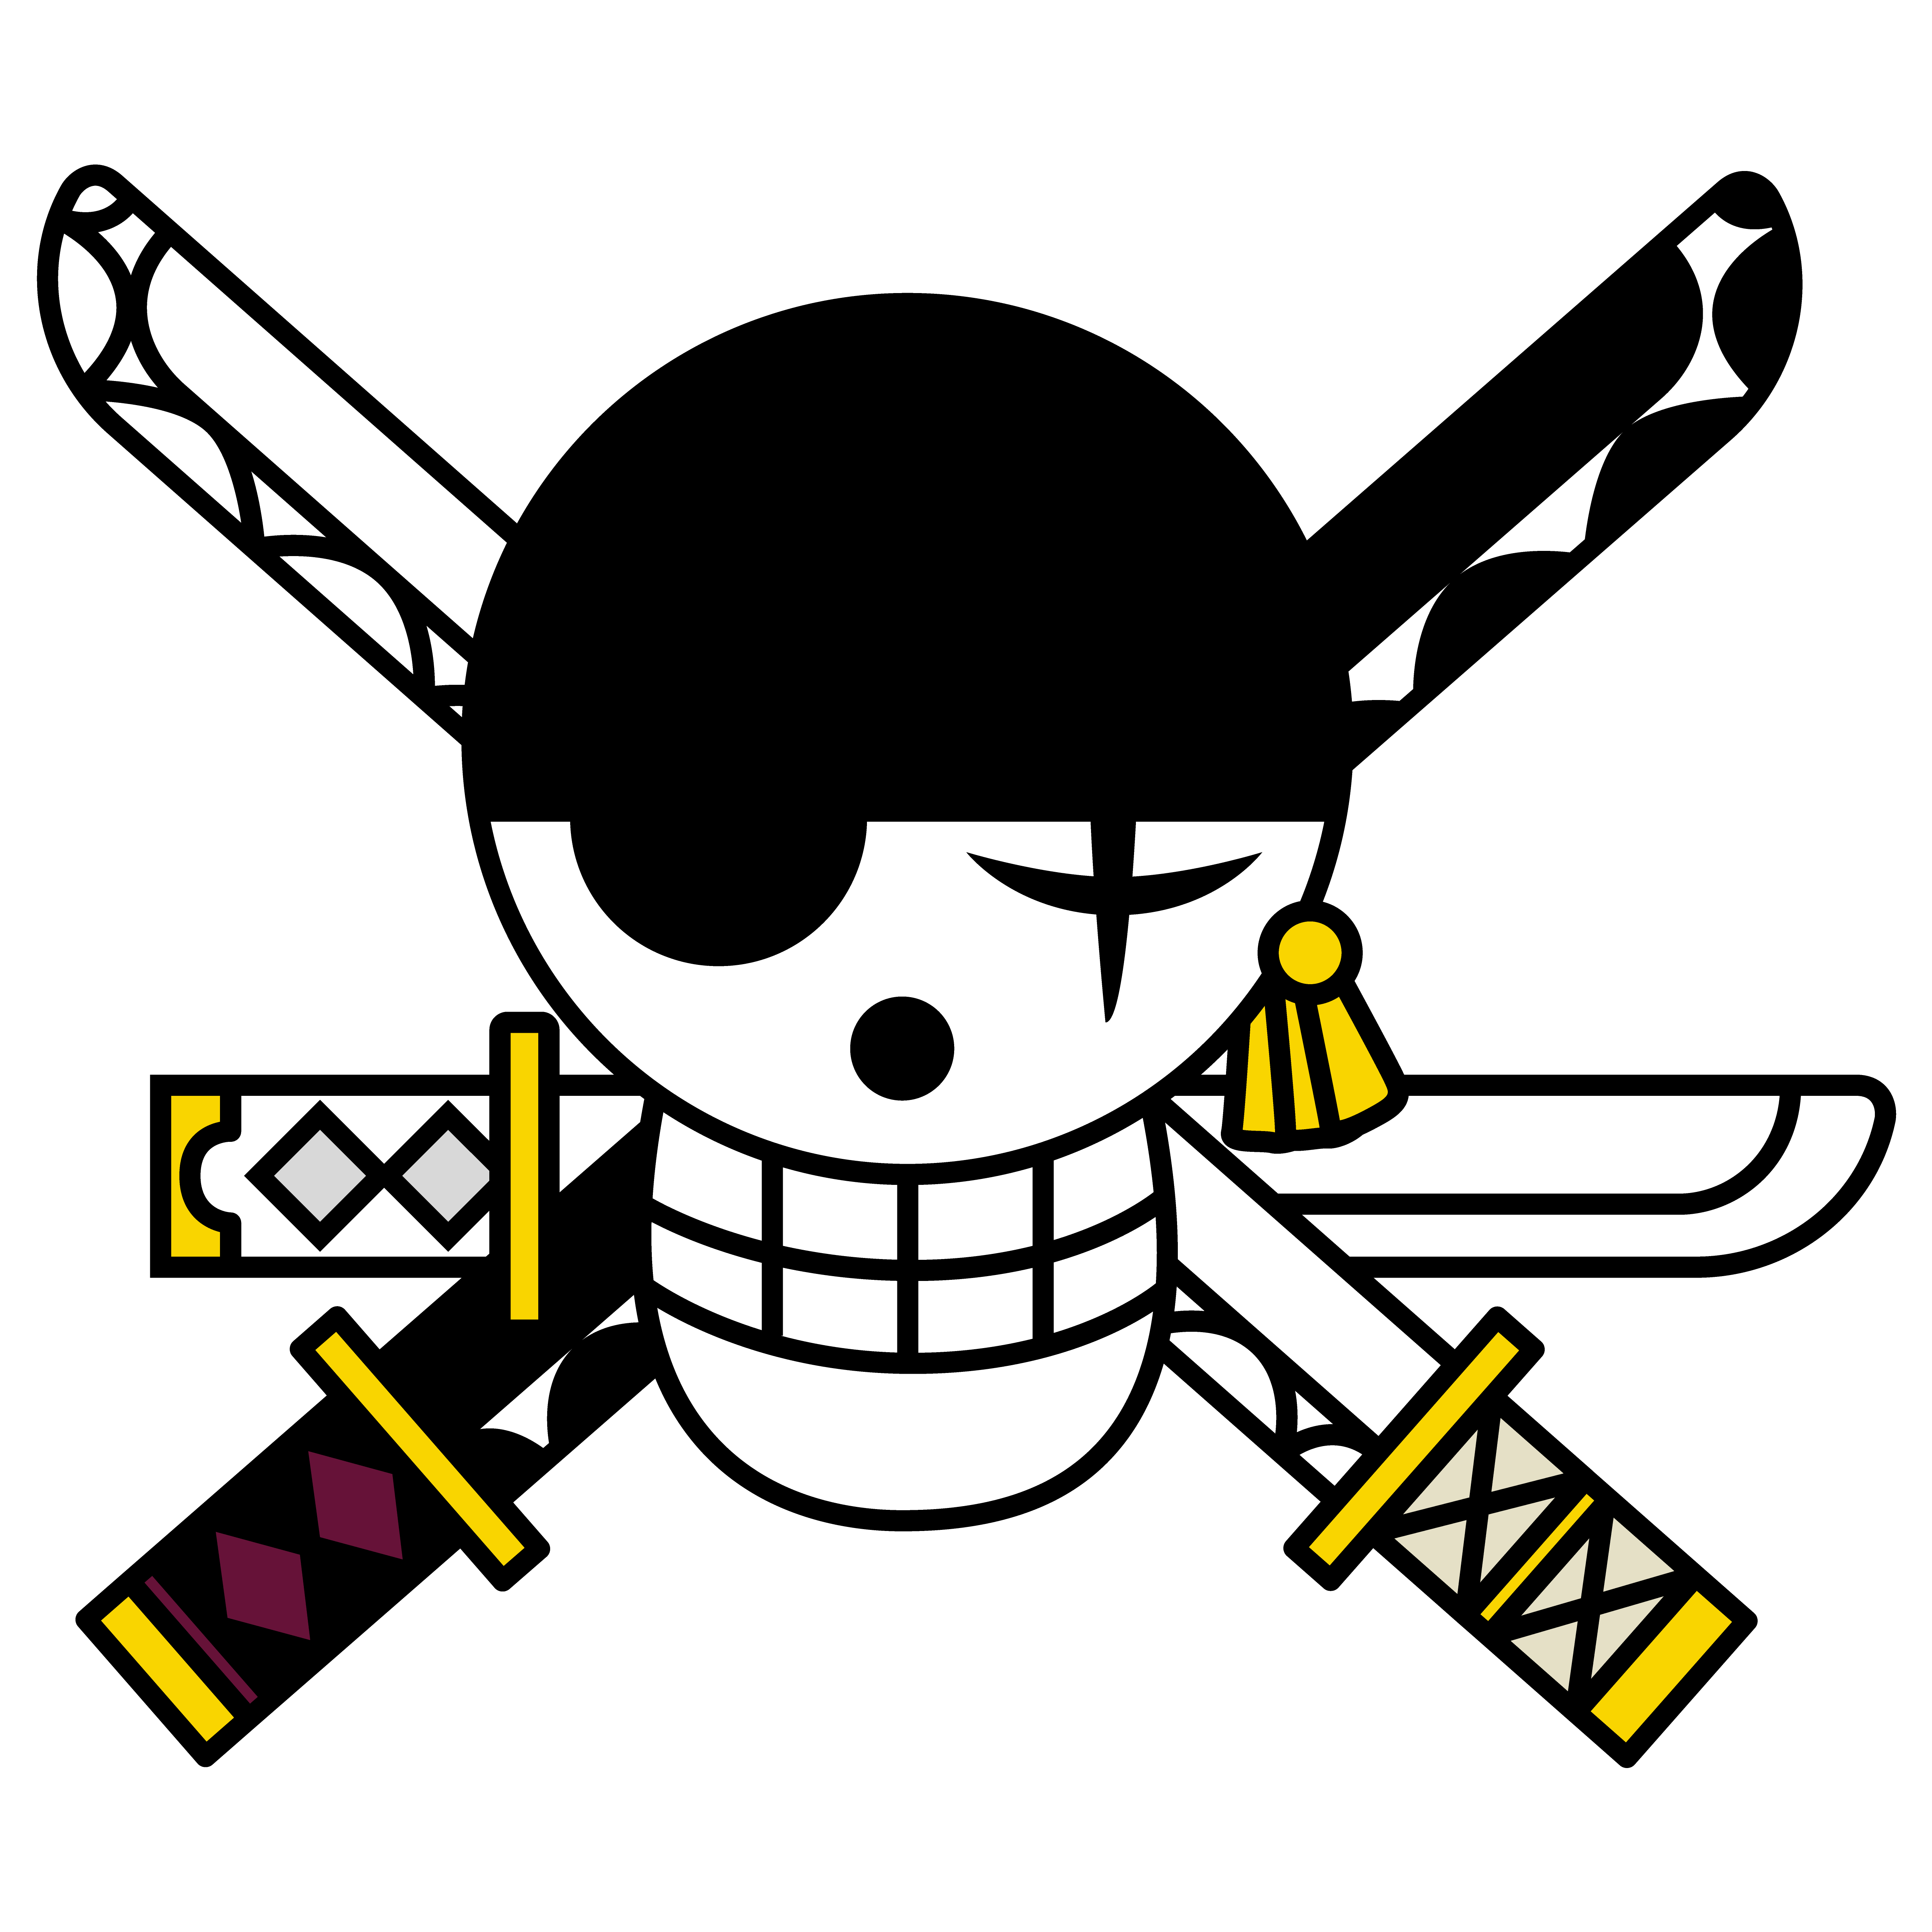 one piece, One-eyed pirate, sword, crossed logo